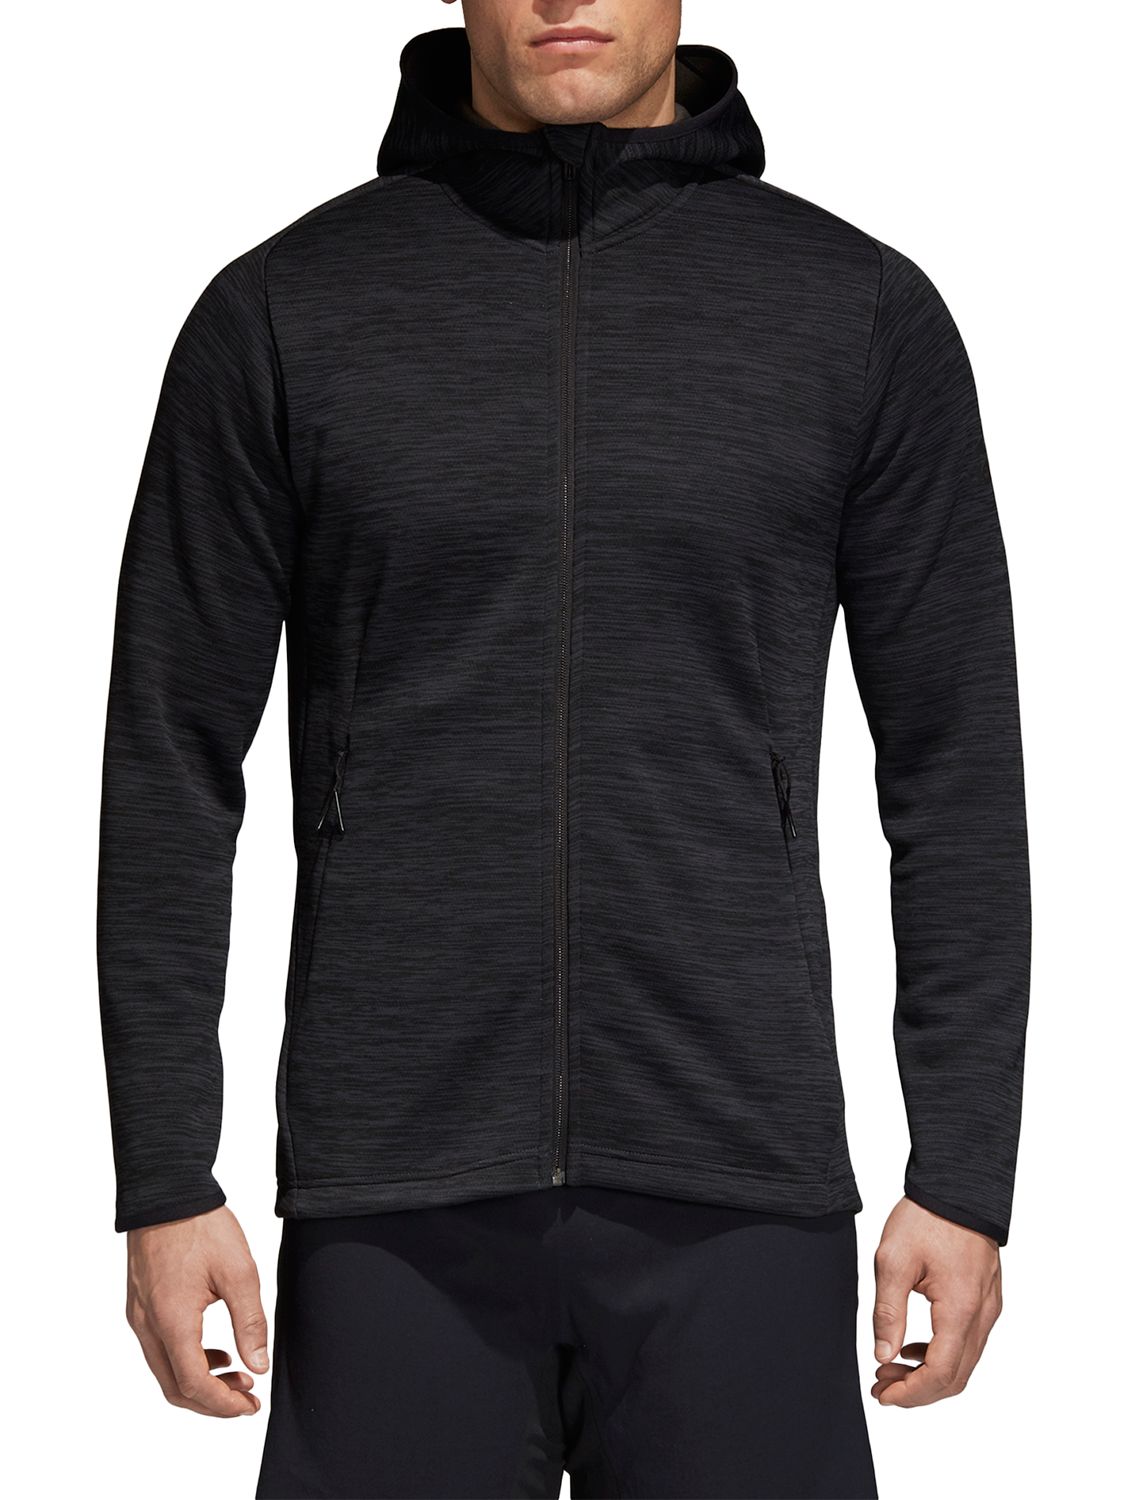 6 Day Adidas workout hoodie for Push Pull Legs